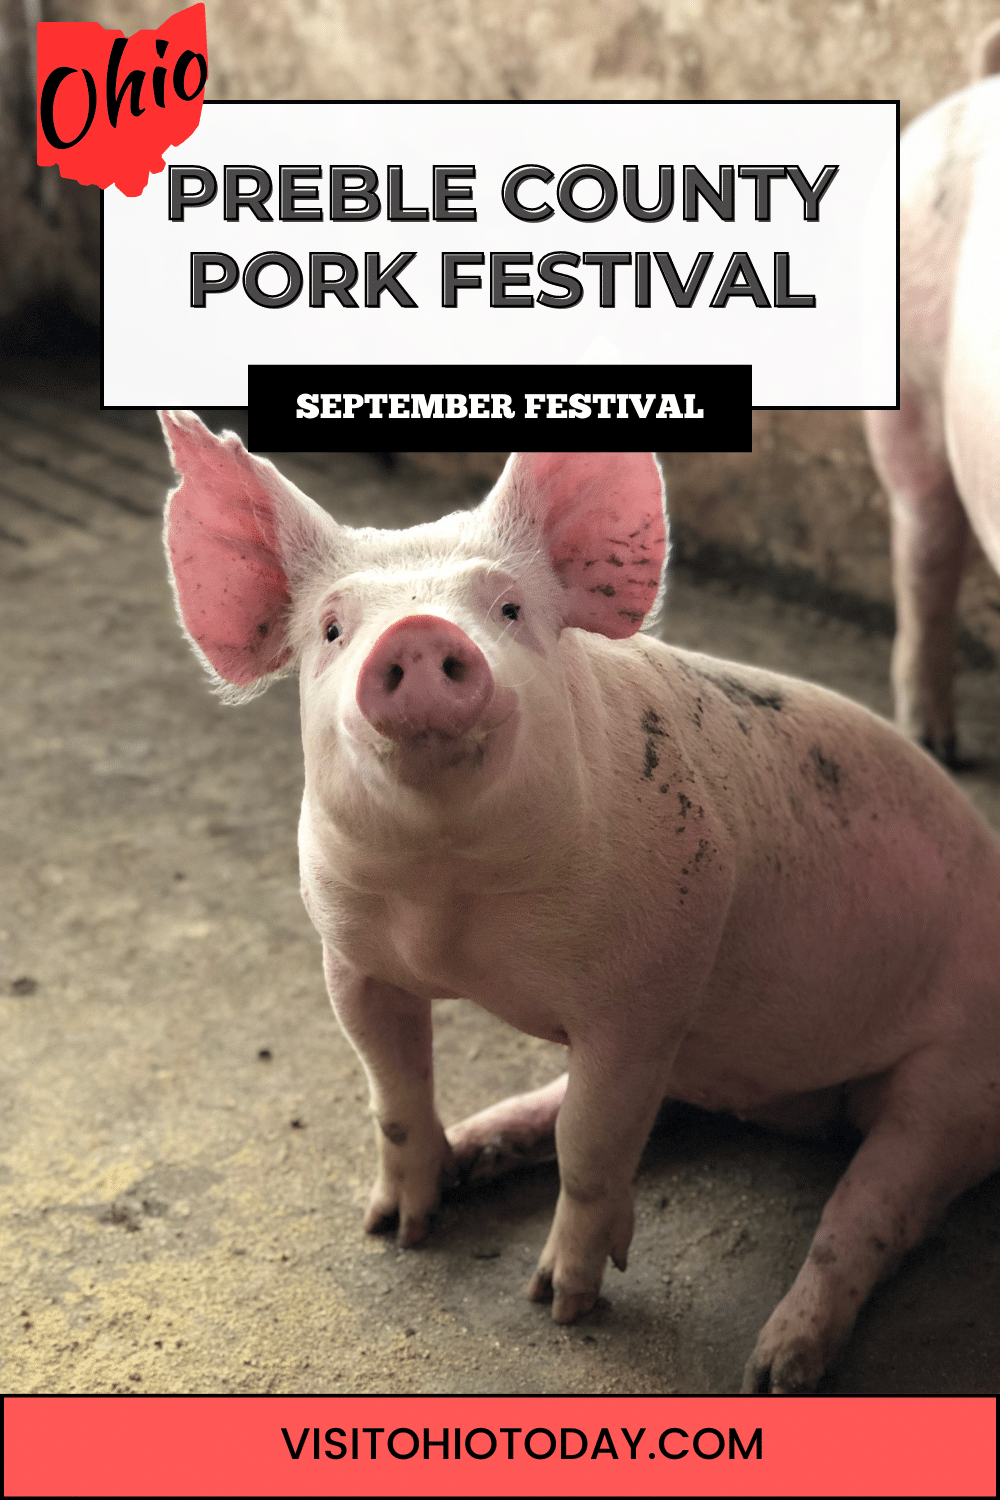 Experience the mouthwatering delights of the Preble County Pork Festival, a beloved tradition since 1970. Savor the region's best pork chops, delectable sides, and heavenly breakfast pancakes with sausage in a celebration where food reigns supreme.